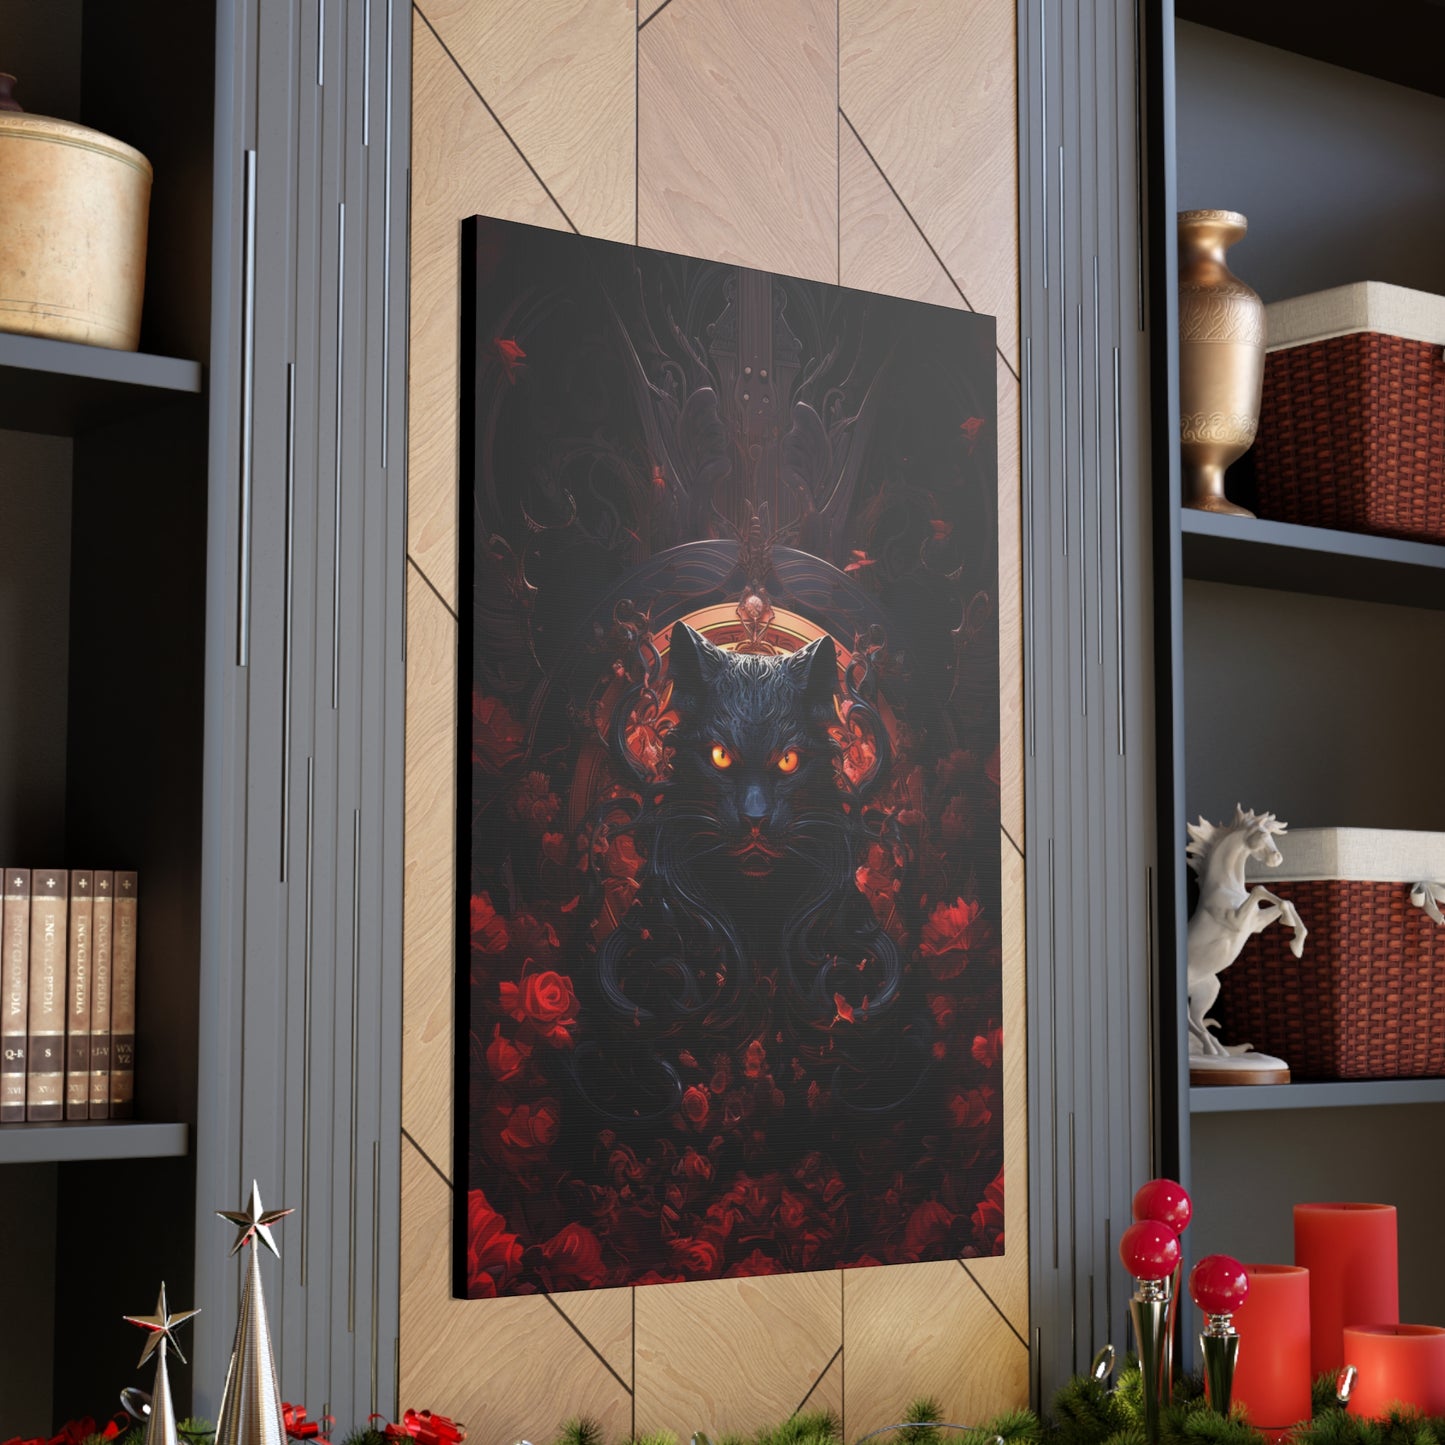 Sureal Rose Red Cat Canvas Poster